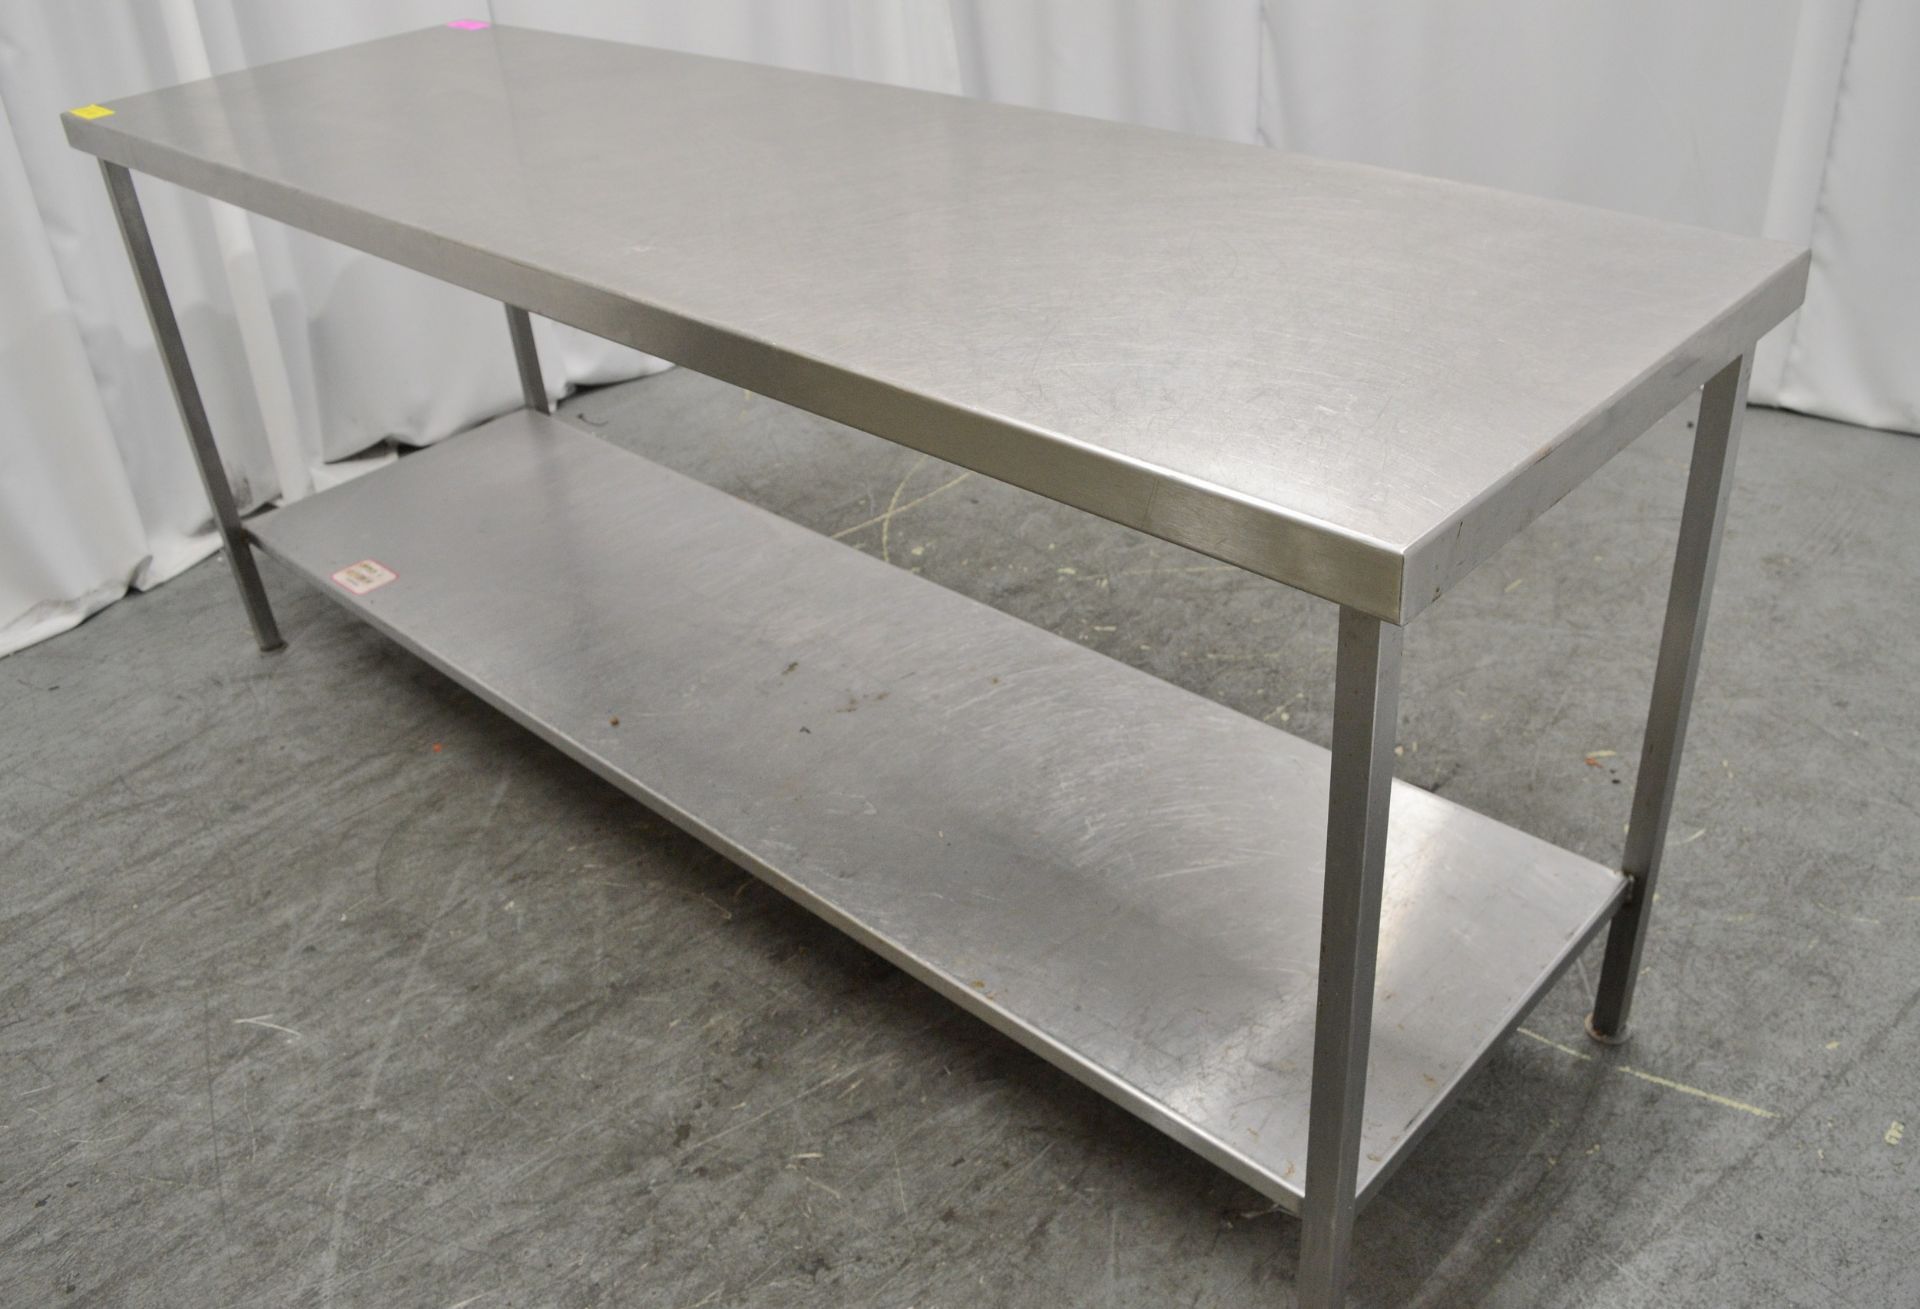 Stainless Steel Preparation Table W2100 x D650 x H880mm. - Image 3 of 3